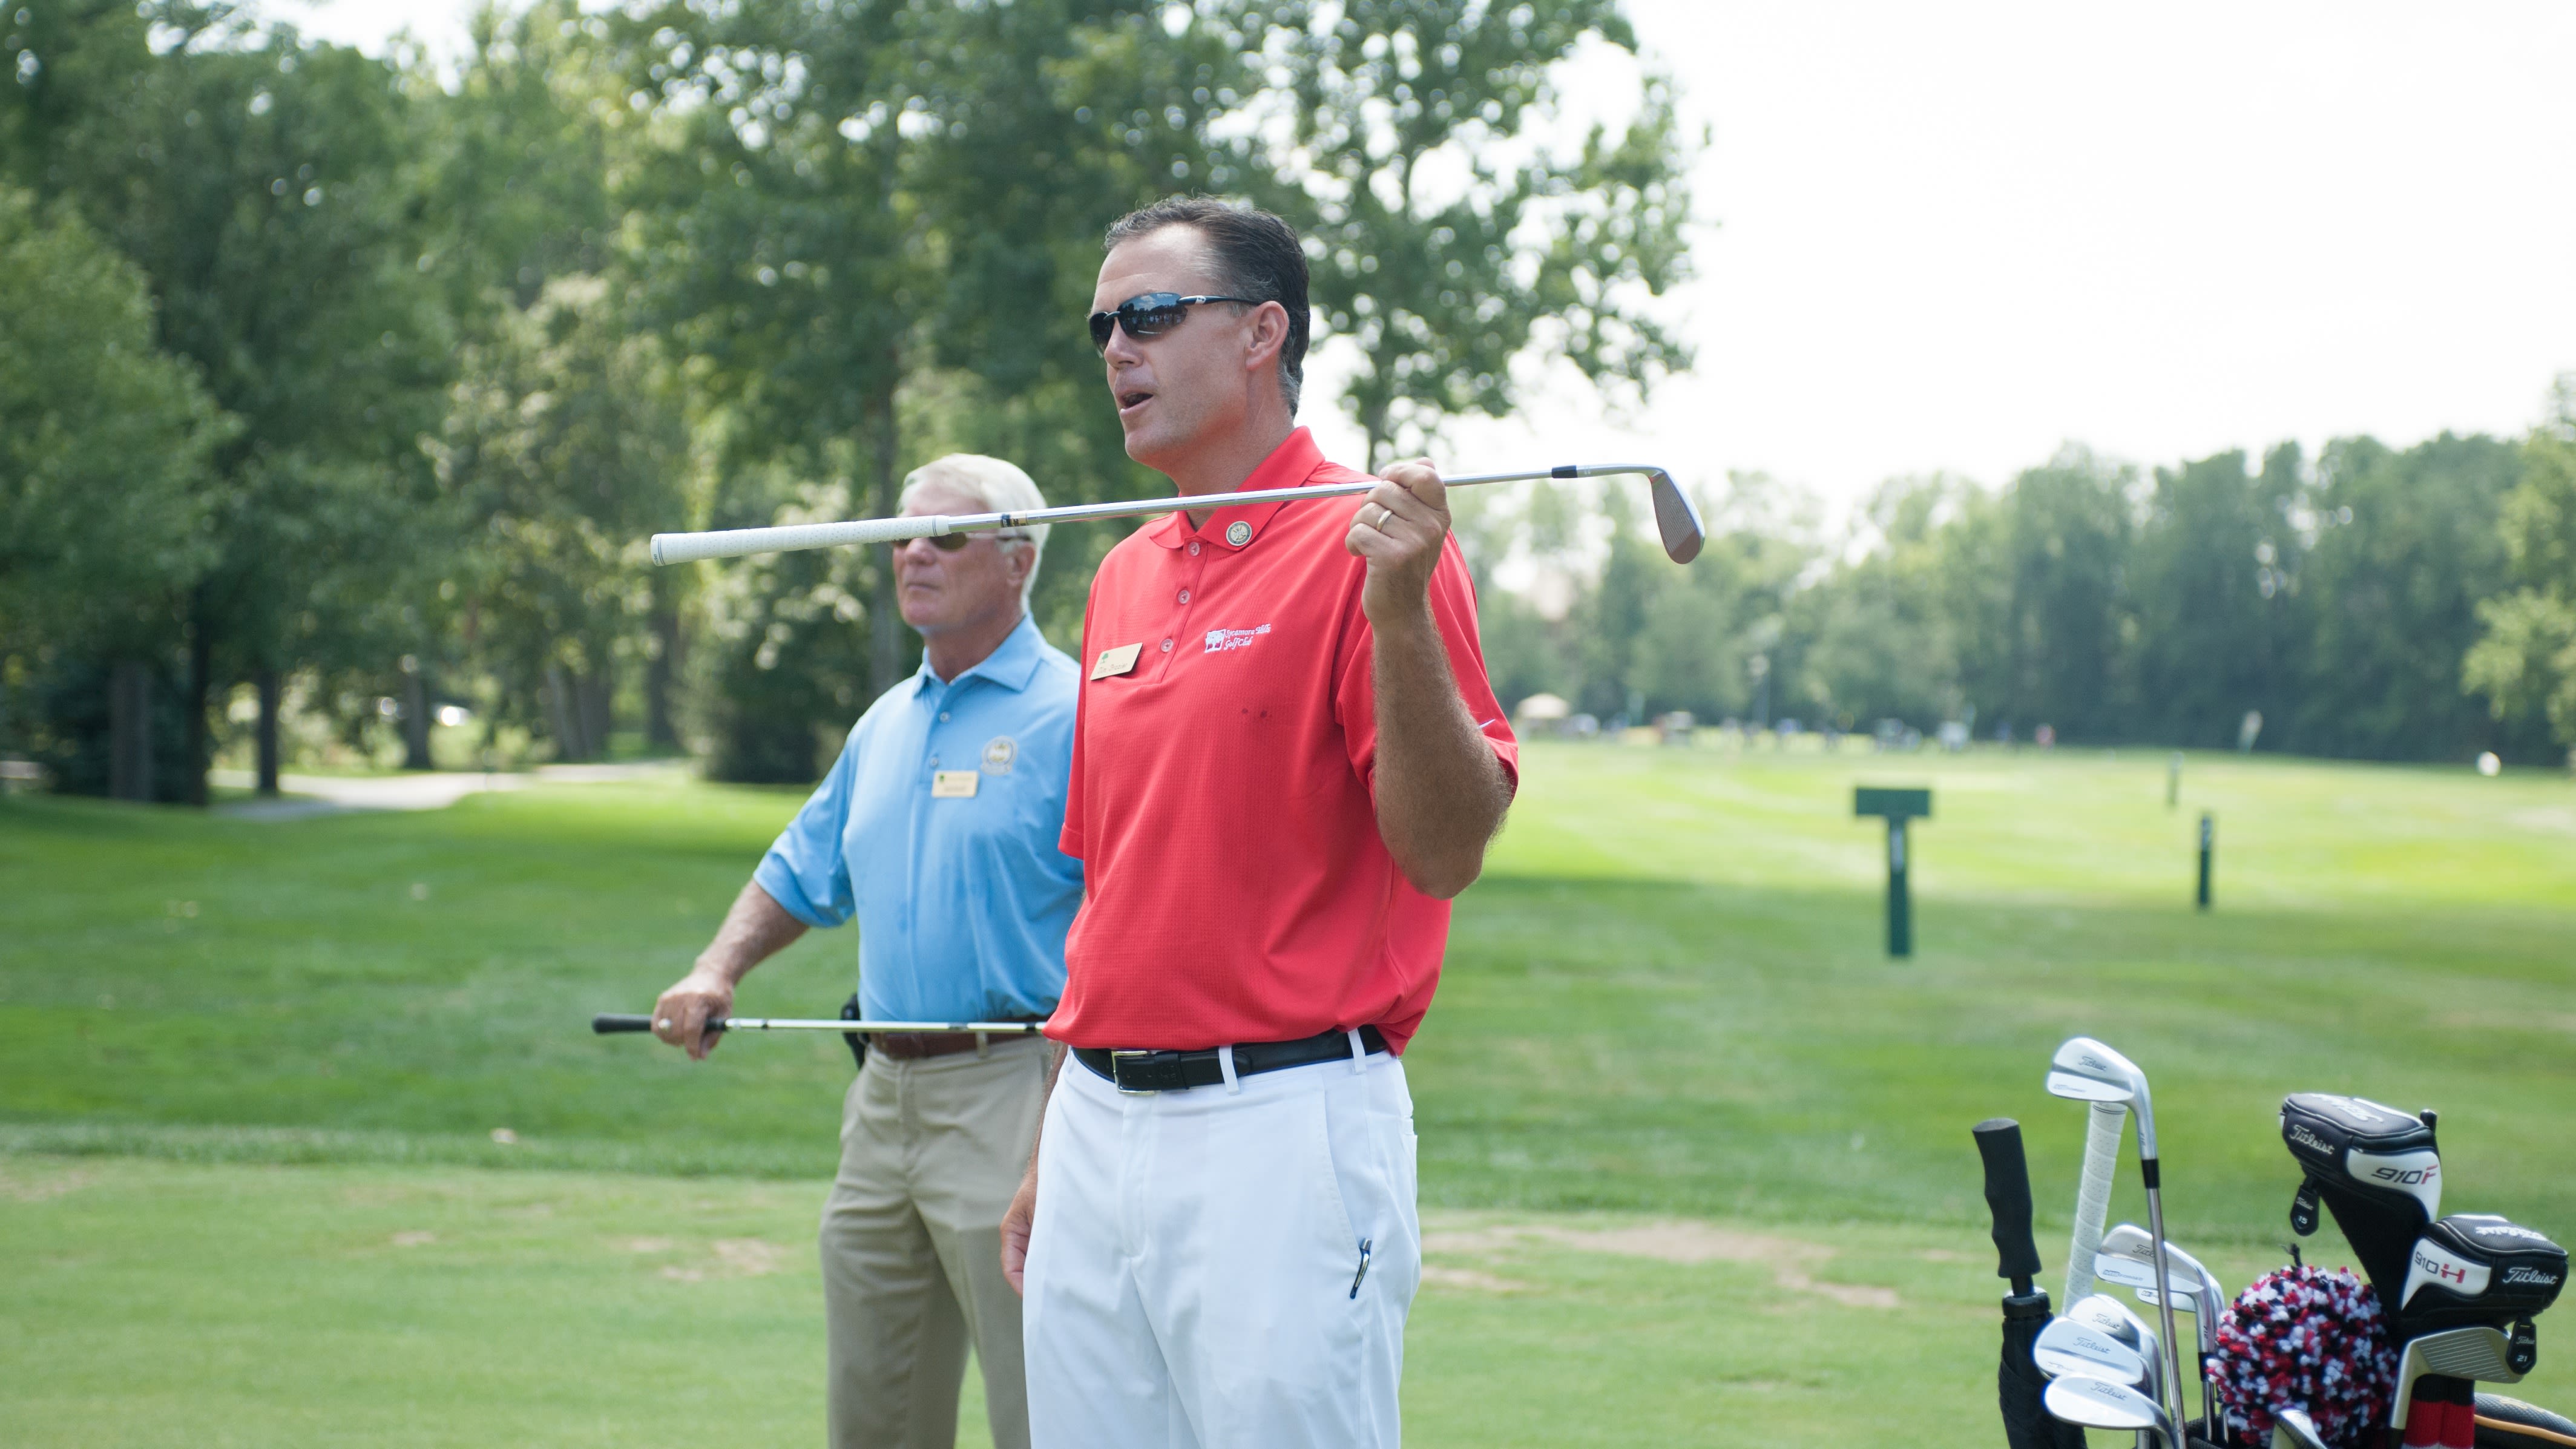 PGA Member Tim Frazier offers the Vokey Wedge Experience for members at Sycamore Hills in Fort Wayne, Indiana.